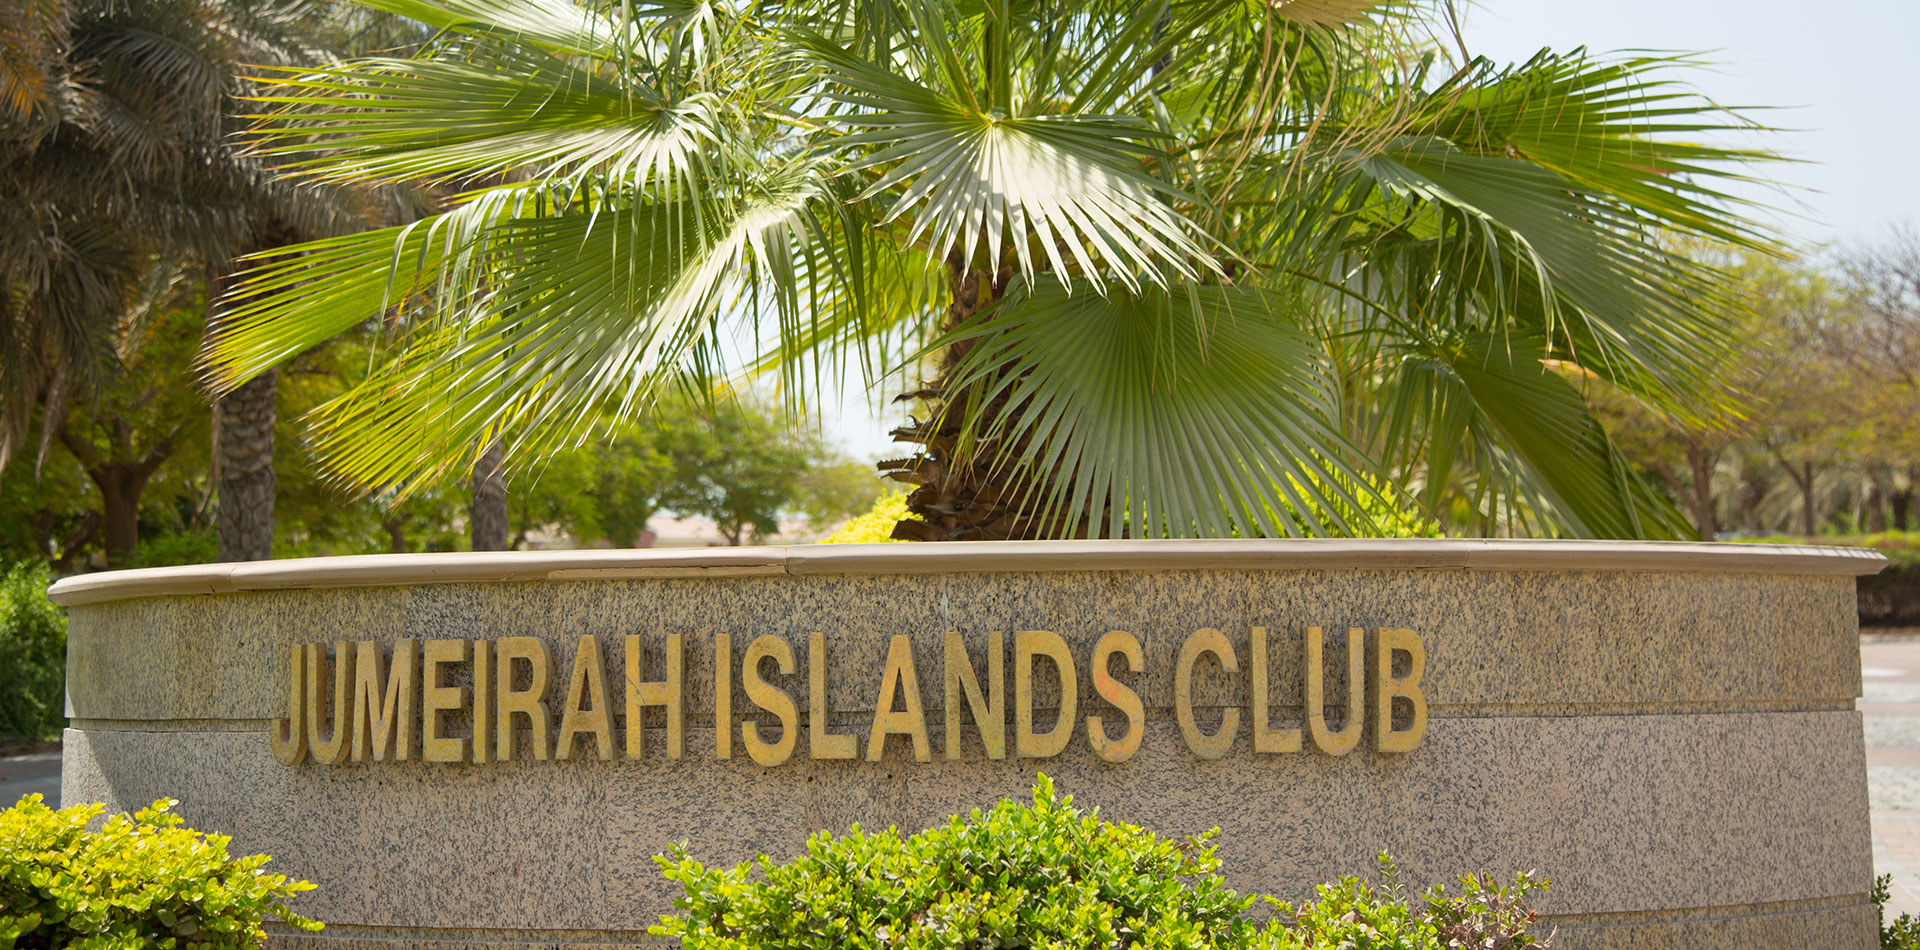 Monument Signage of The Jumeirah Islands Club